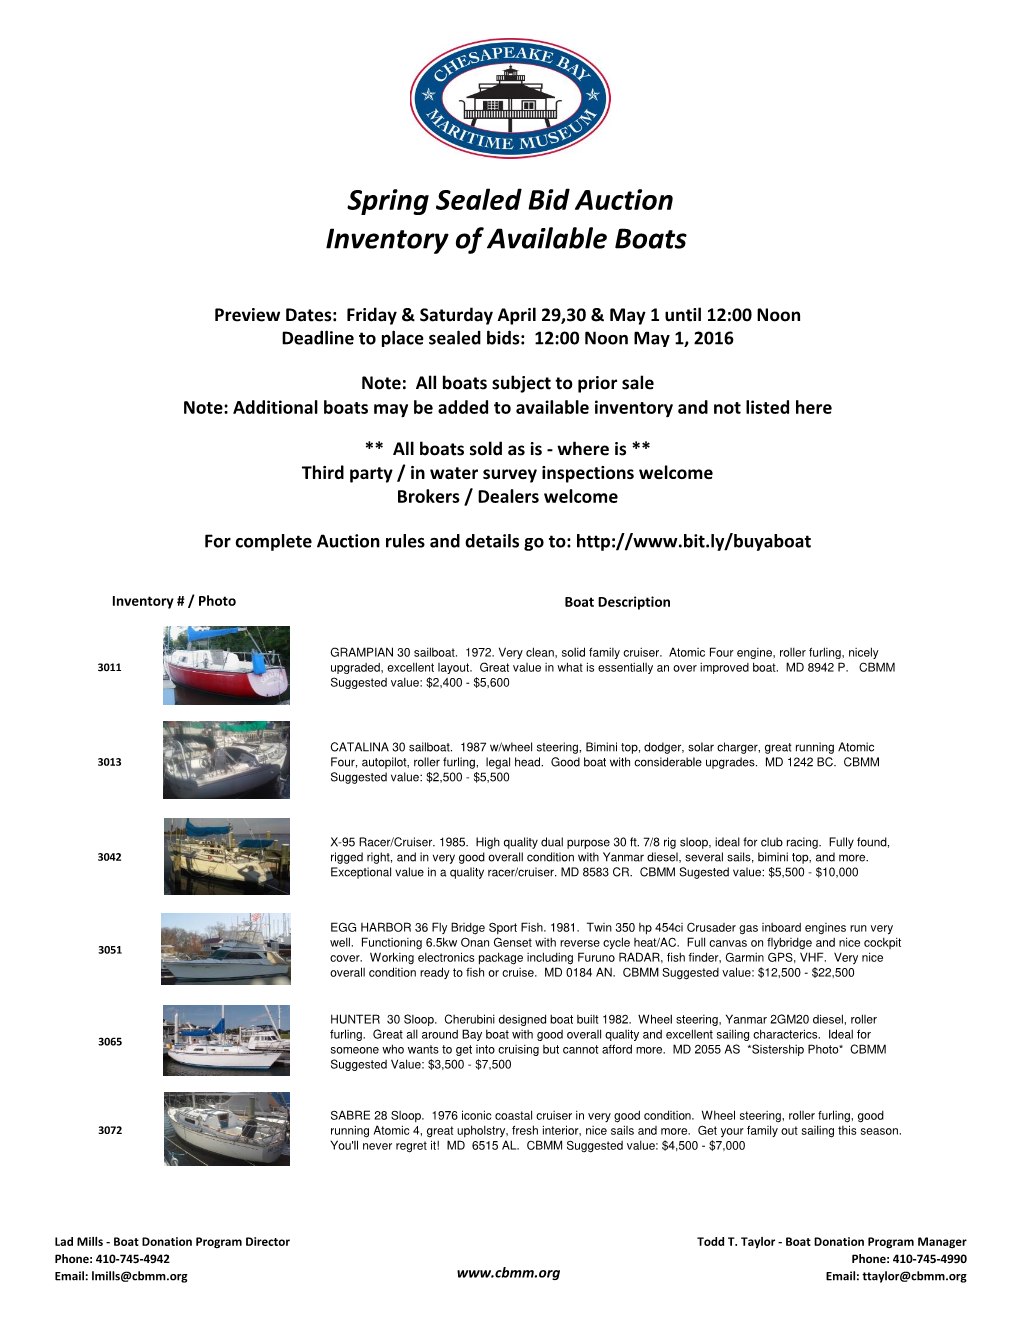 Spring Sealed Bid Auction Inventory of Available Boats